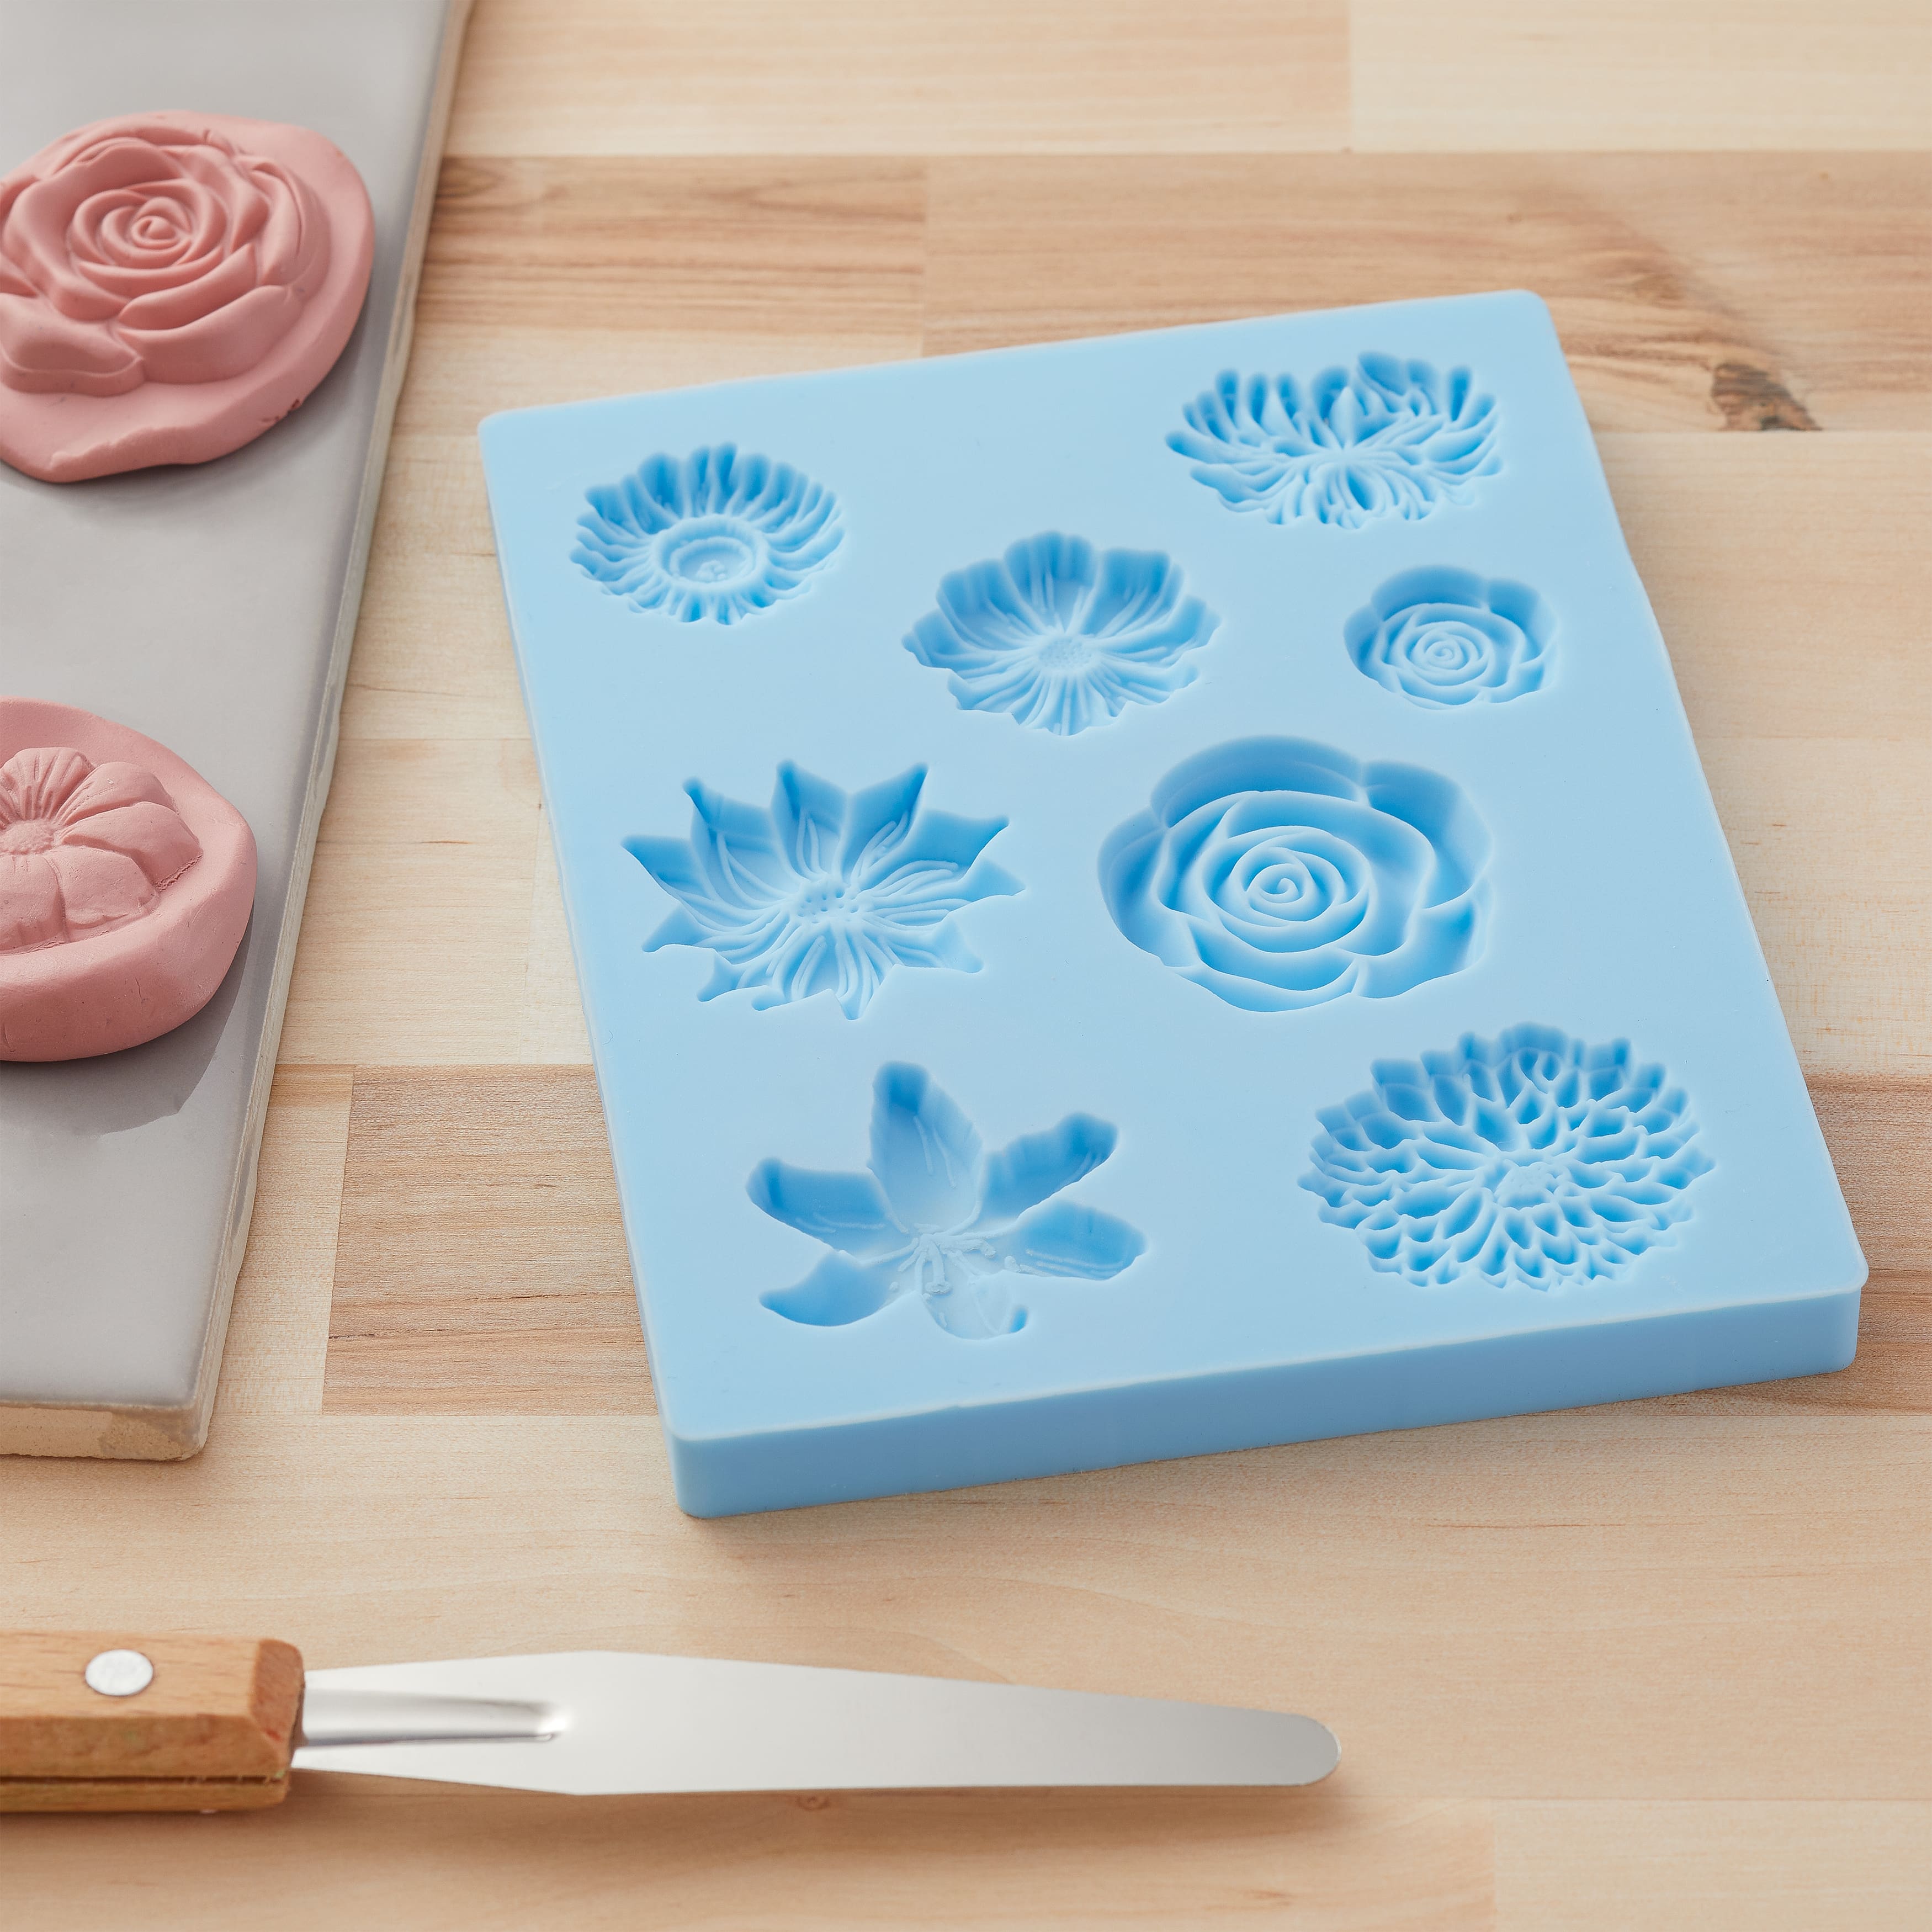 Floral Premium Push Mold by Craft Smart&#xAE;